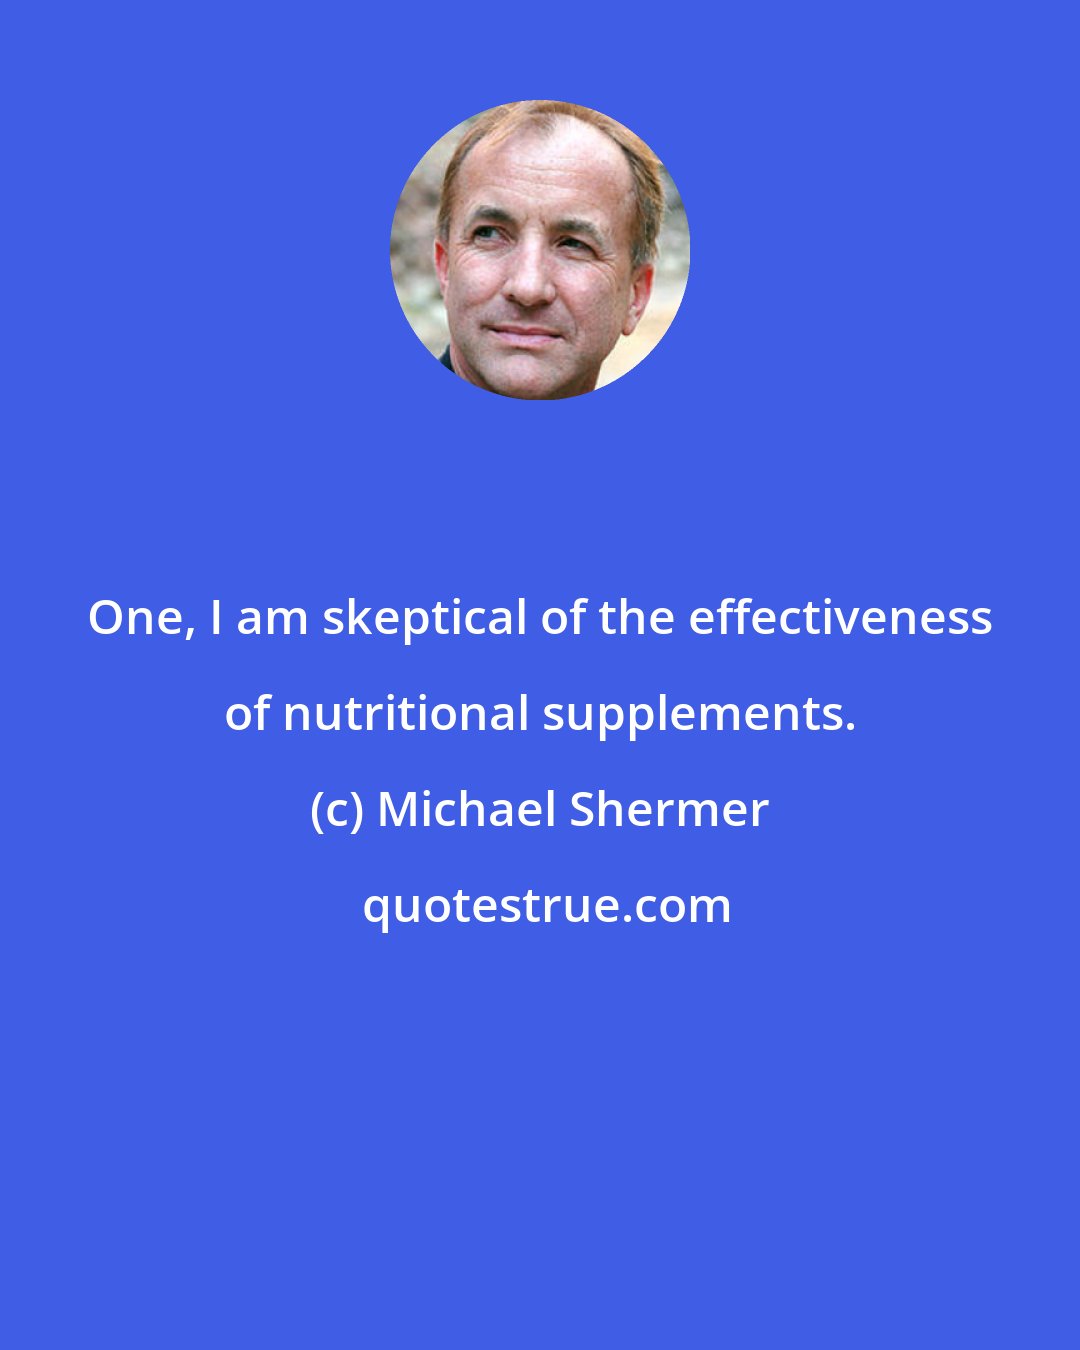 Michael Shermer: One, I am skeptical of the effectiveness of nutritional supplements.